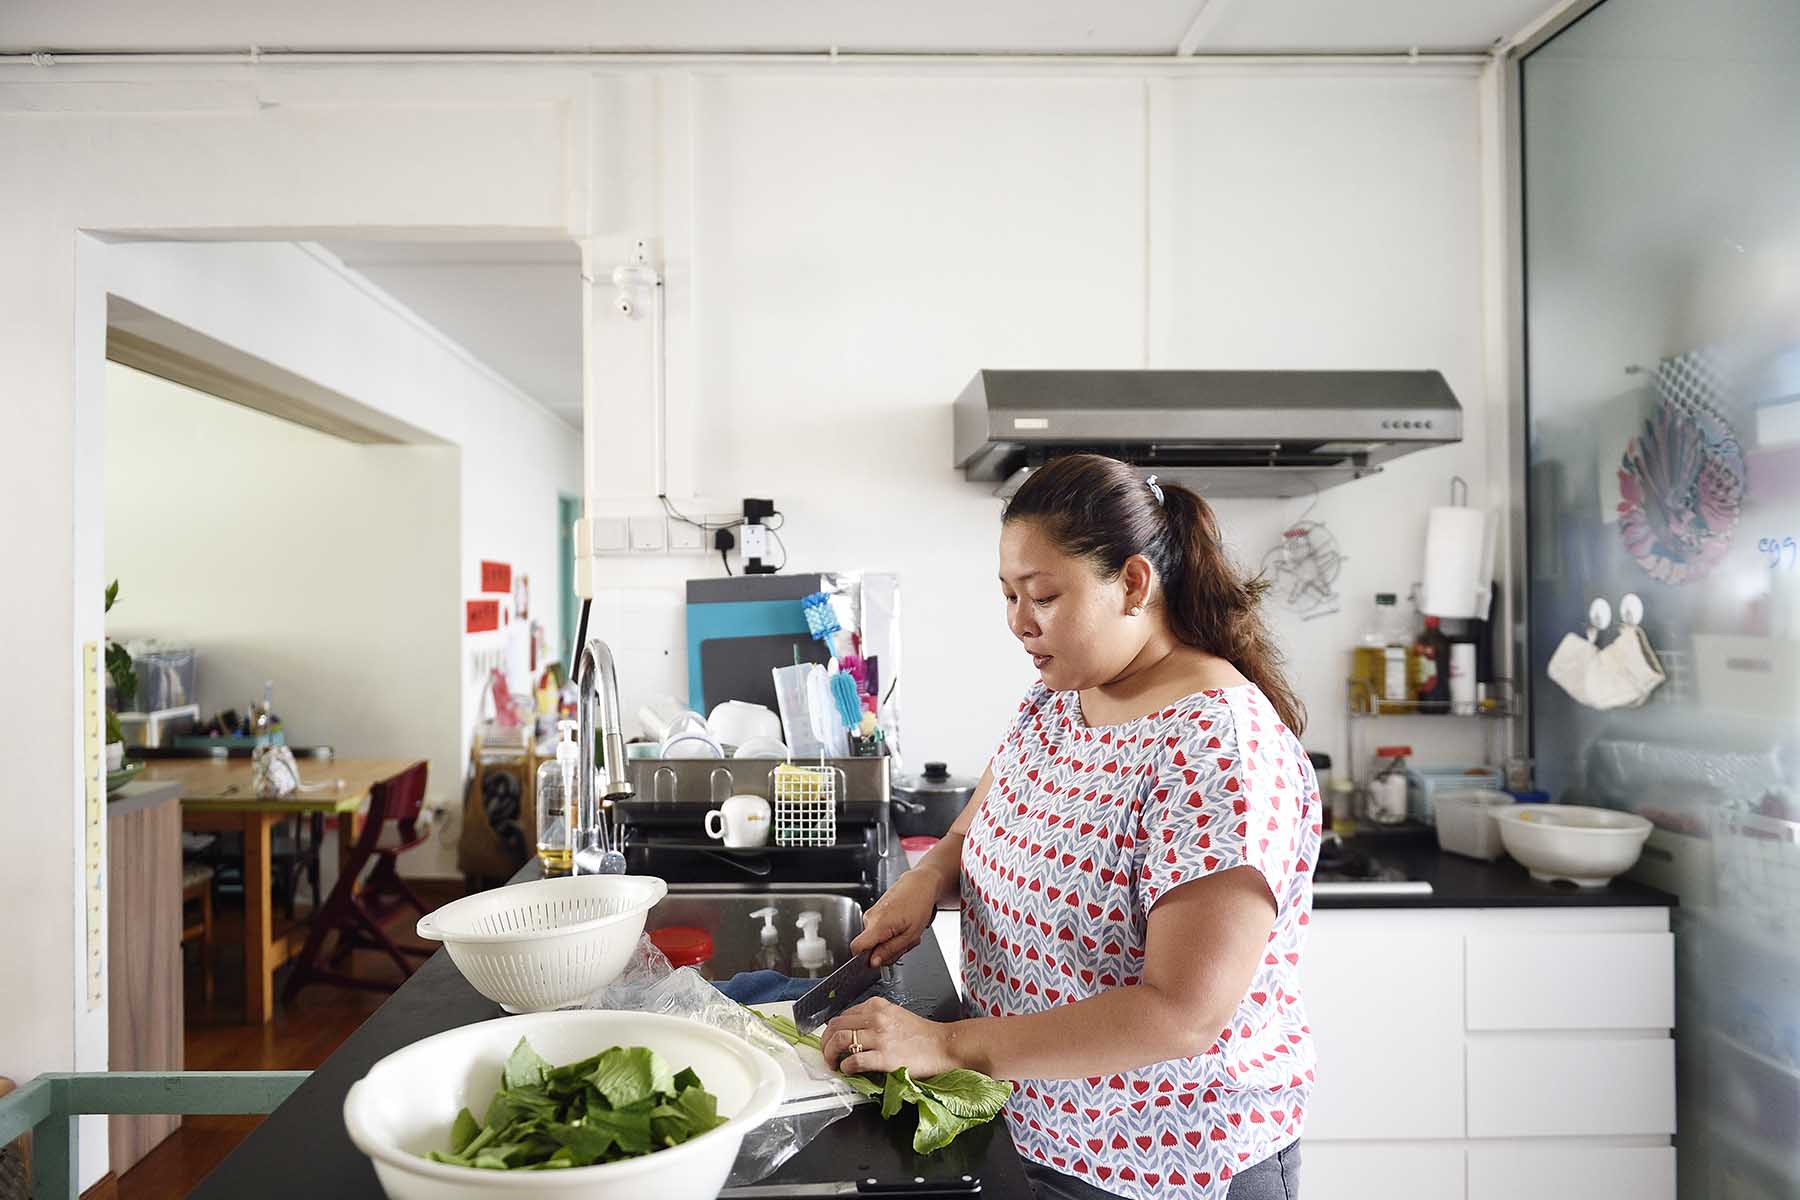 Woman standing in the kitchen, cutting vegetables. The house is messy.